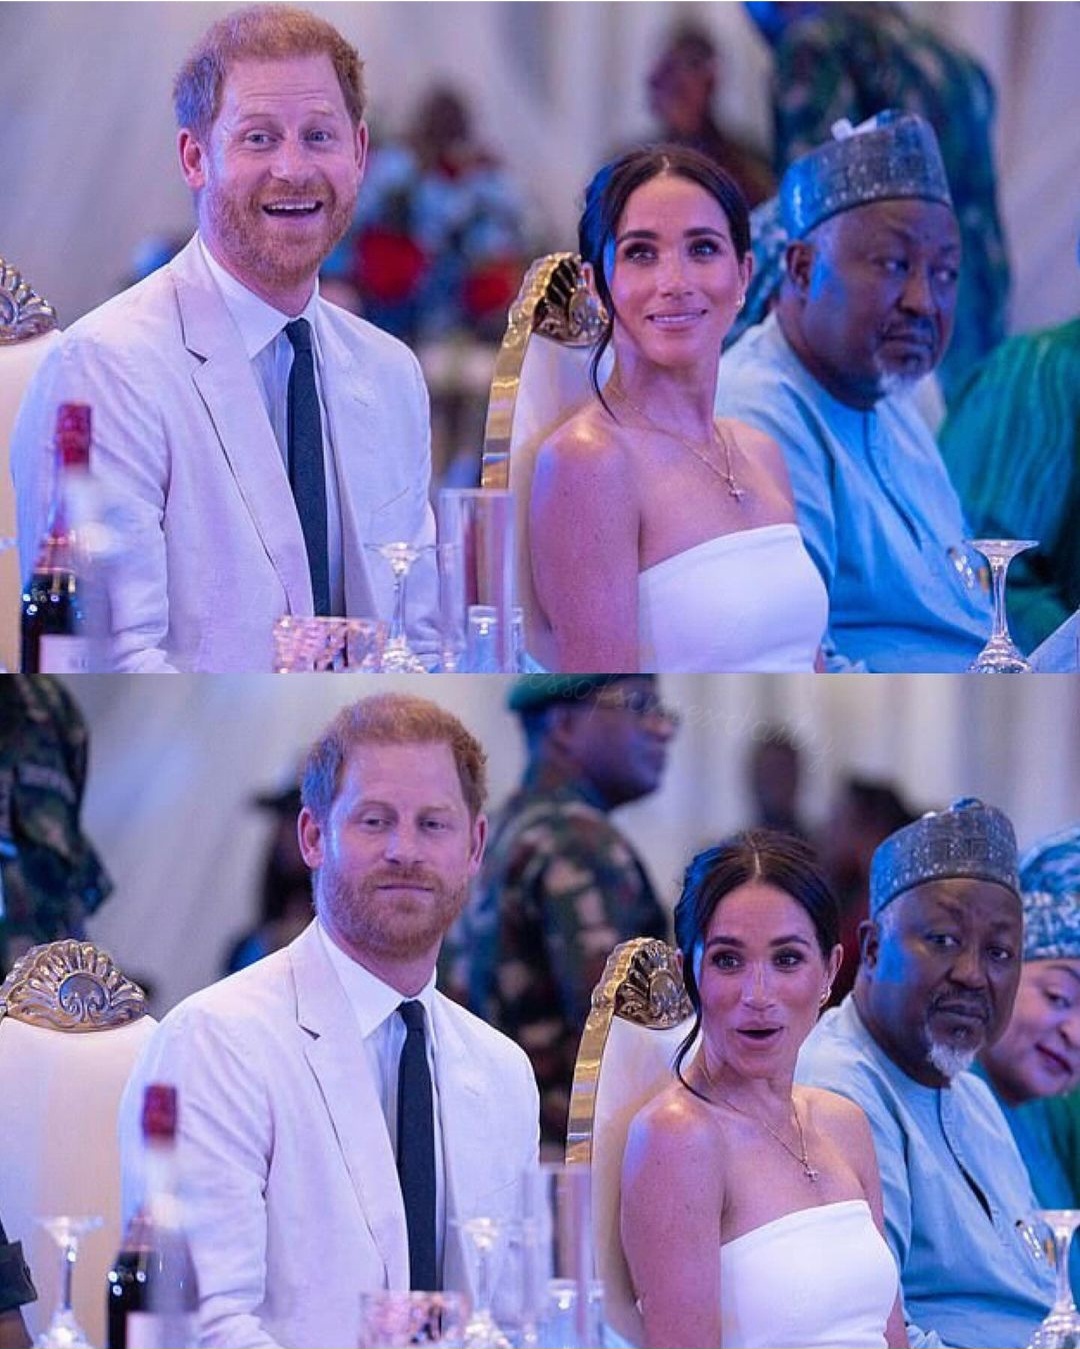 Prince Harry and Meghan Markle attend a reception hosted by the Chief of Defense Staff (photos/video)